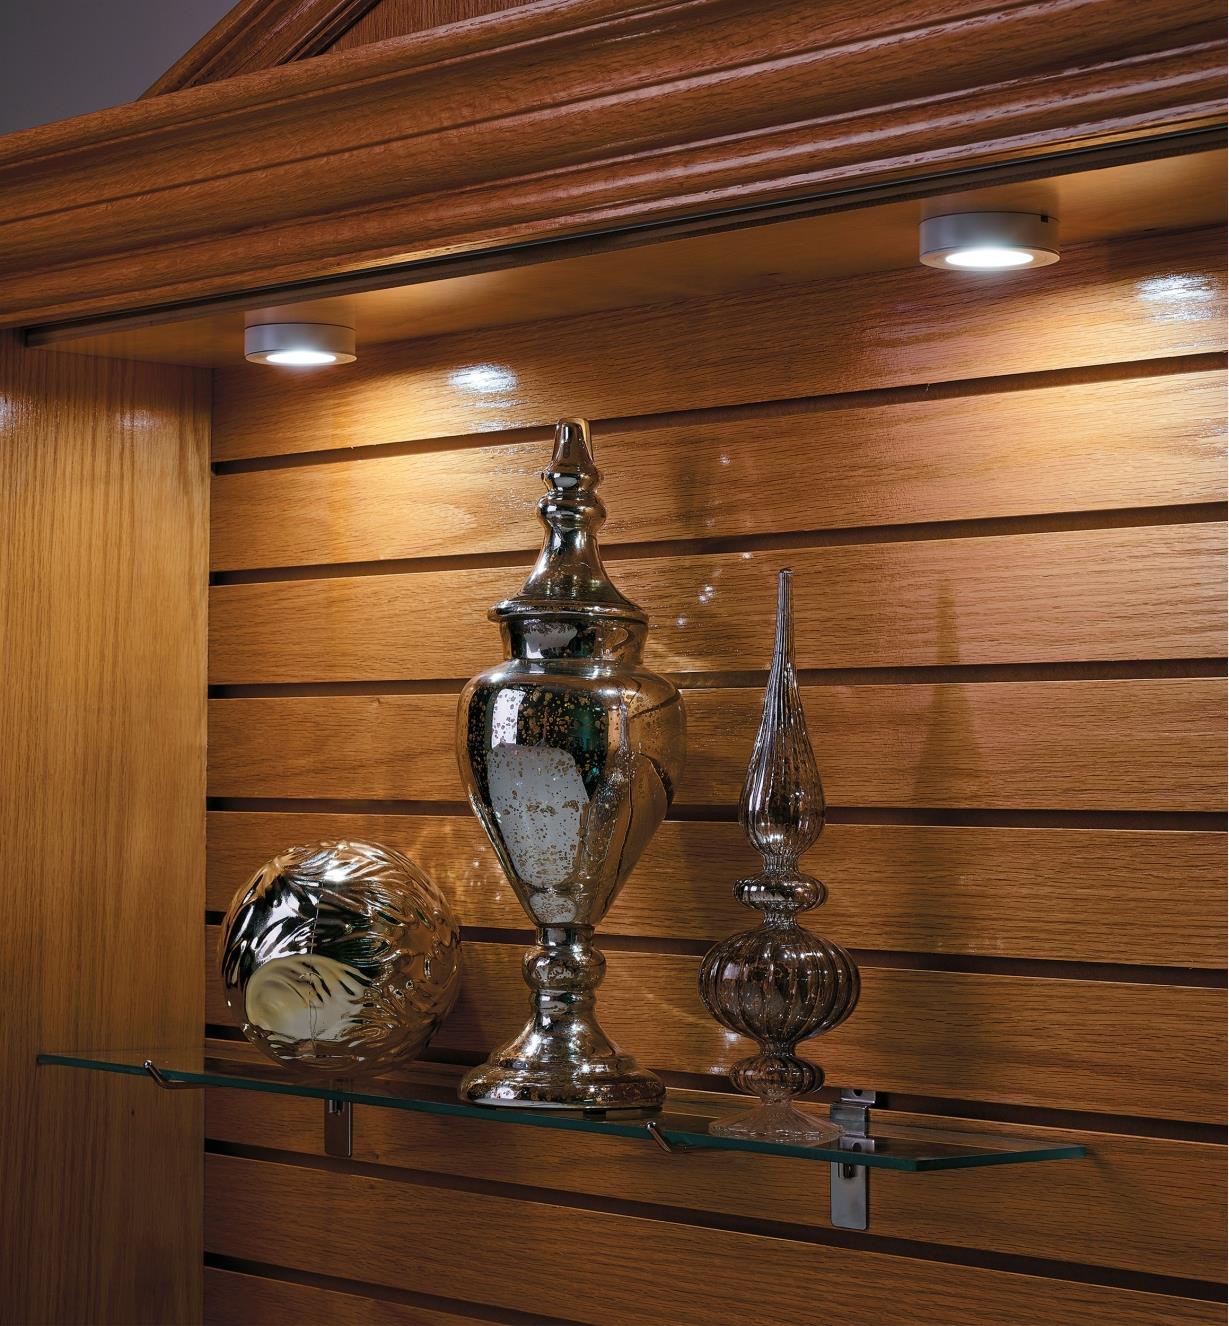 Example of Indoor LED Downlights installed in a display case